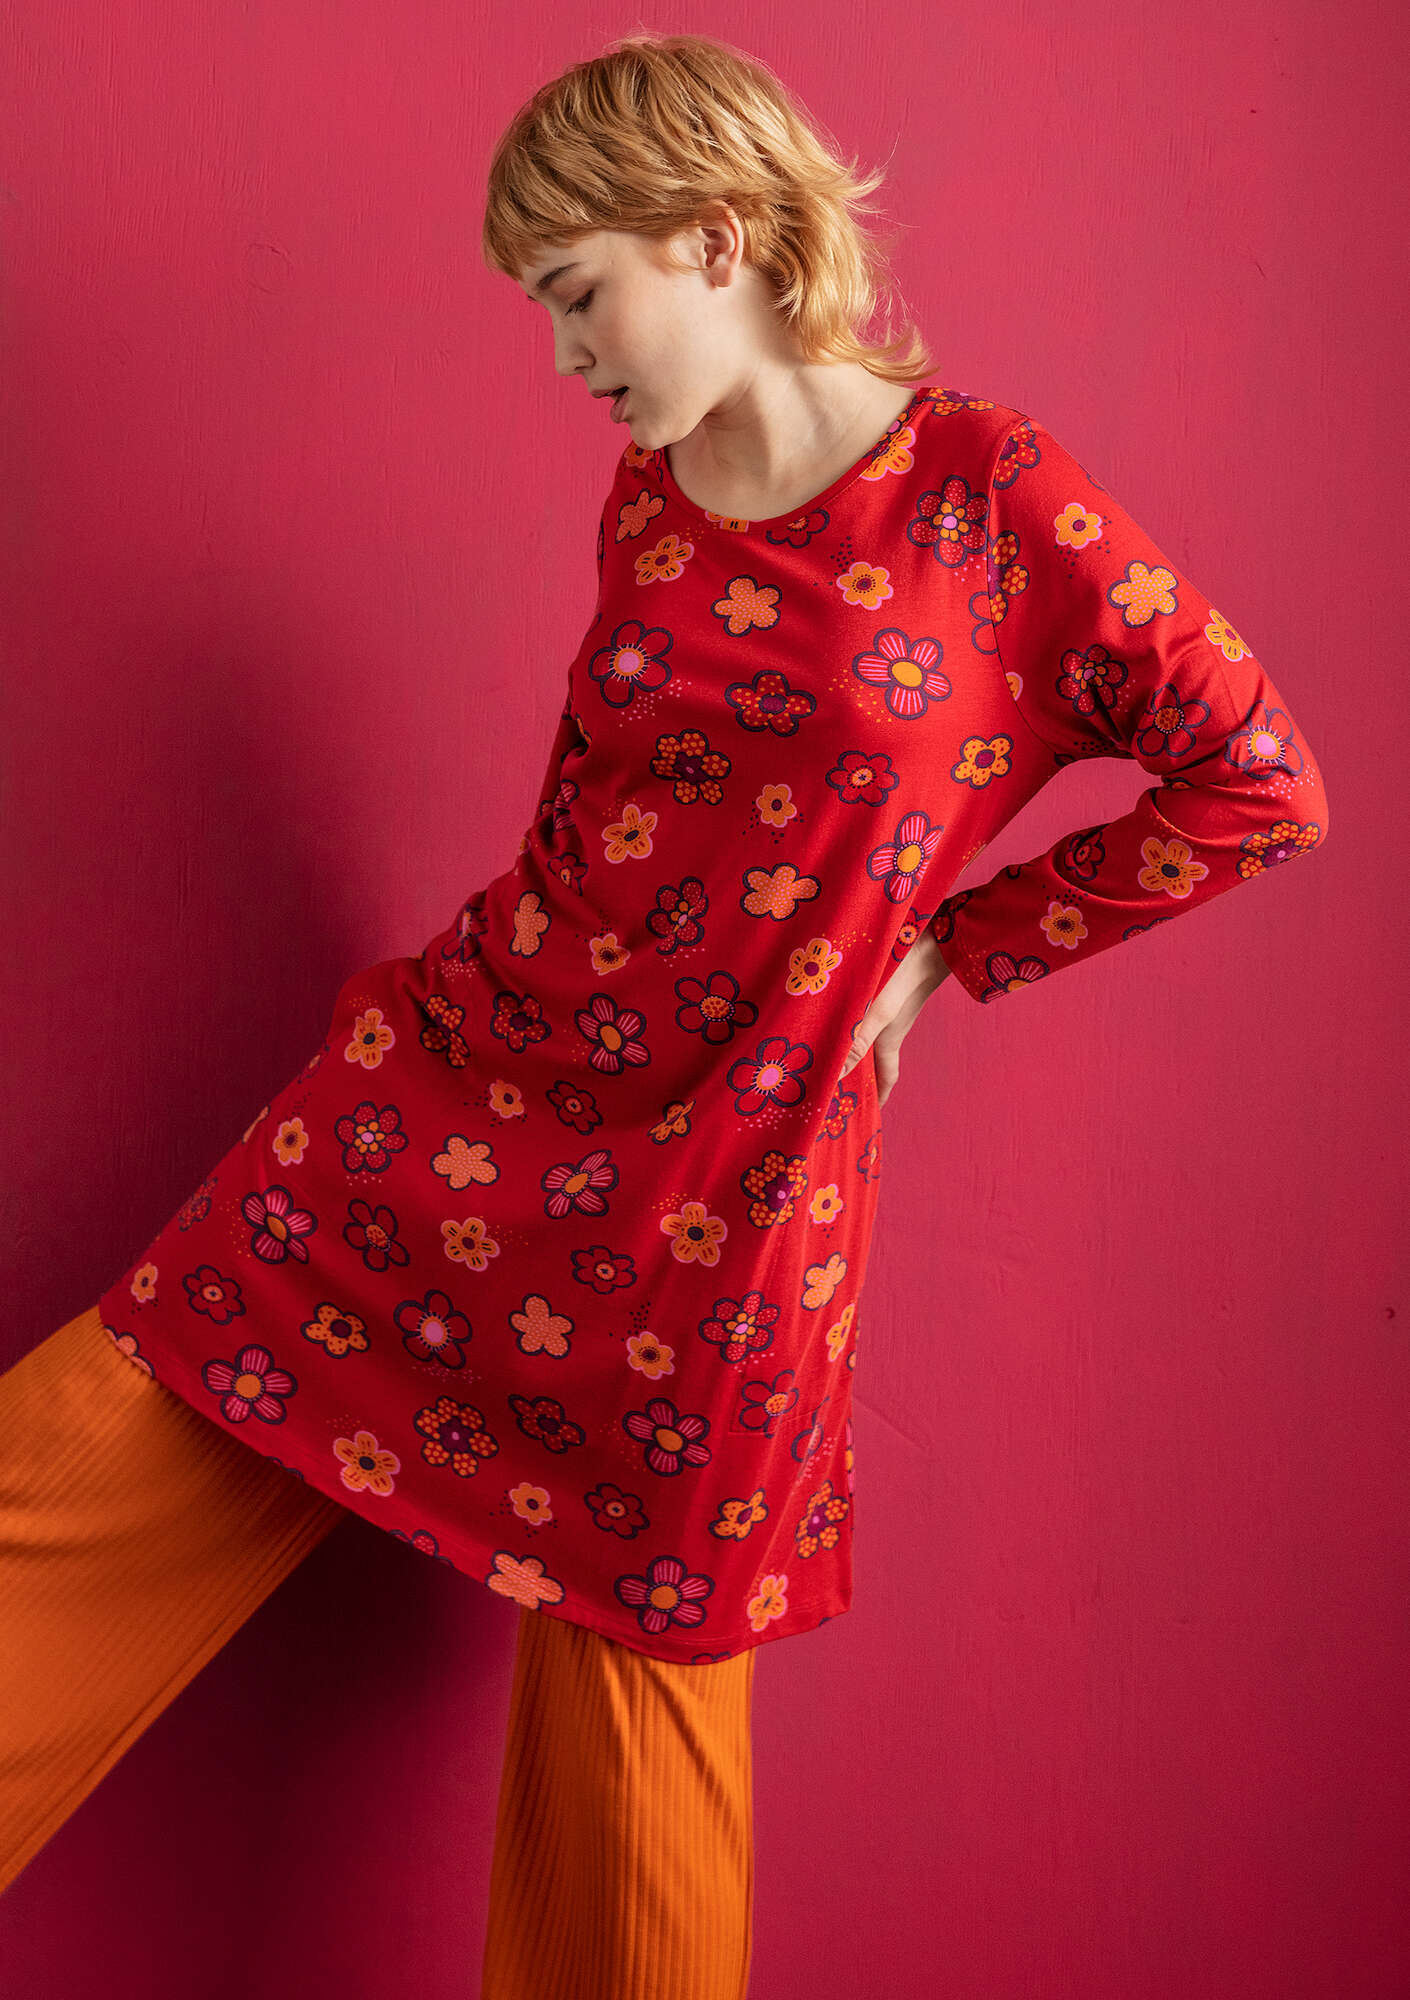 Tricot tuniek Aria parrot red/patterned